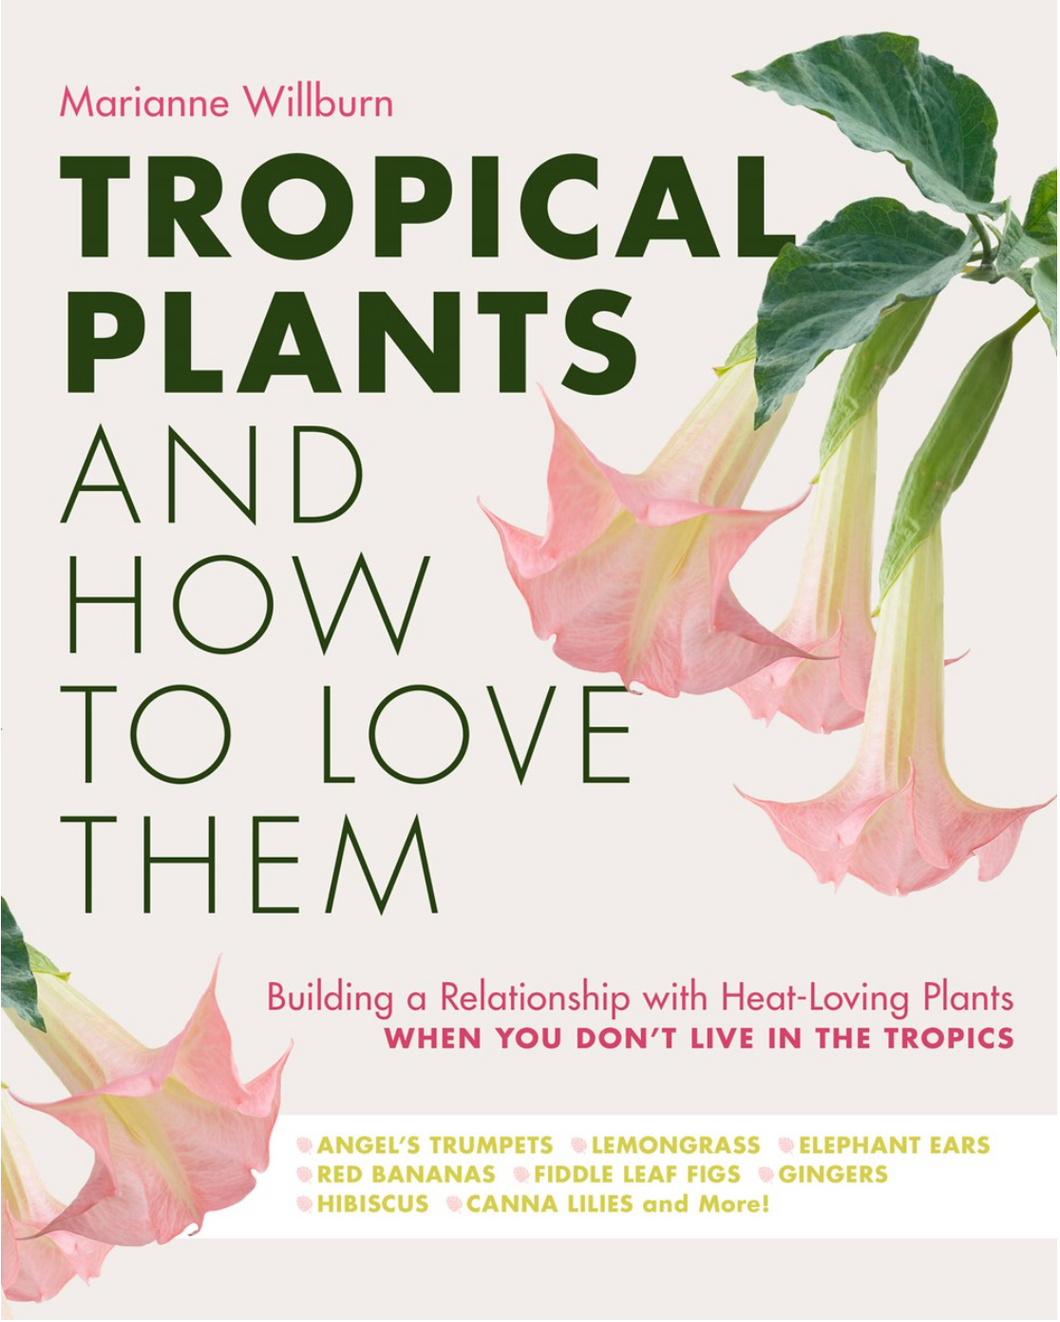 Tropical Plants and How to Love Them